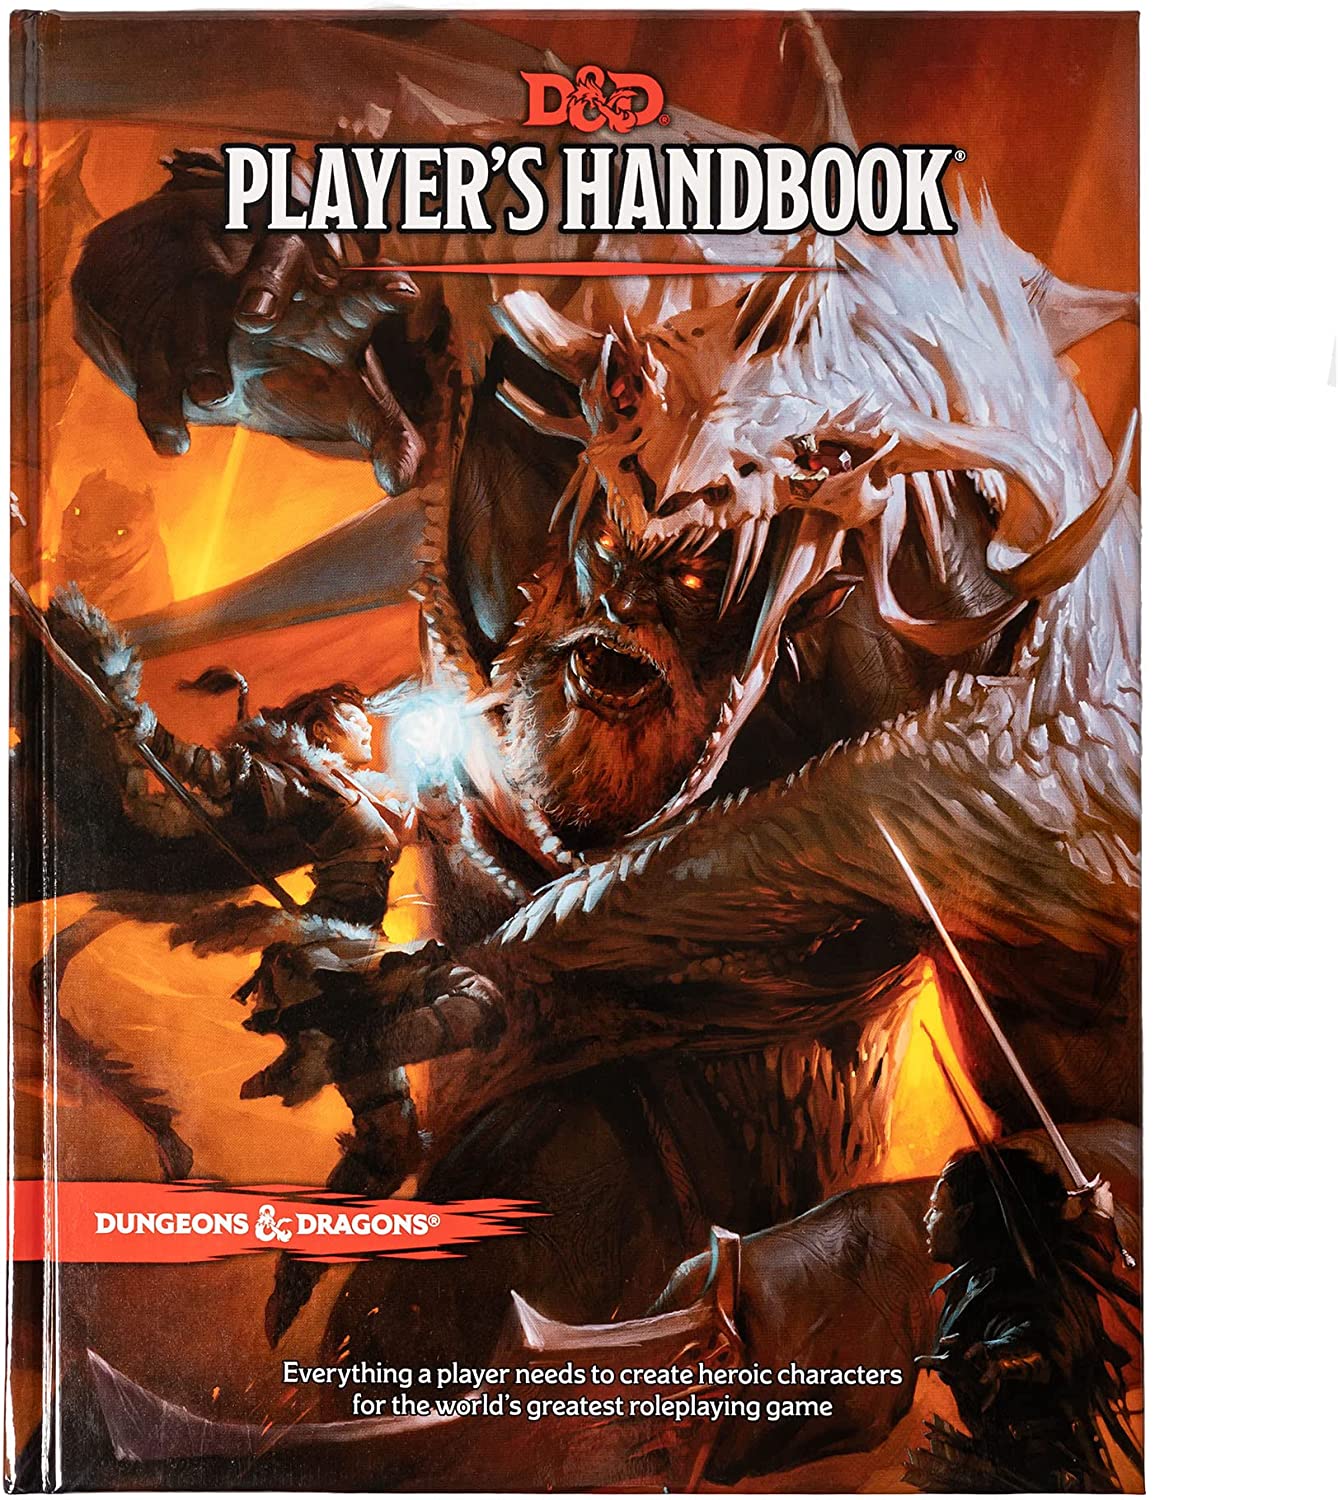 D&D Player’s Handbook (Dungeons & Dragons Core Rulebook) $16 & More + Buy 2 Get 1 Free + Free Shipping w/ Amazon Prime or Orders $25+